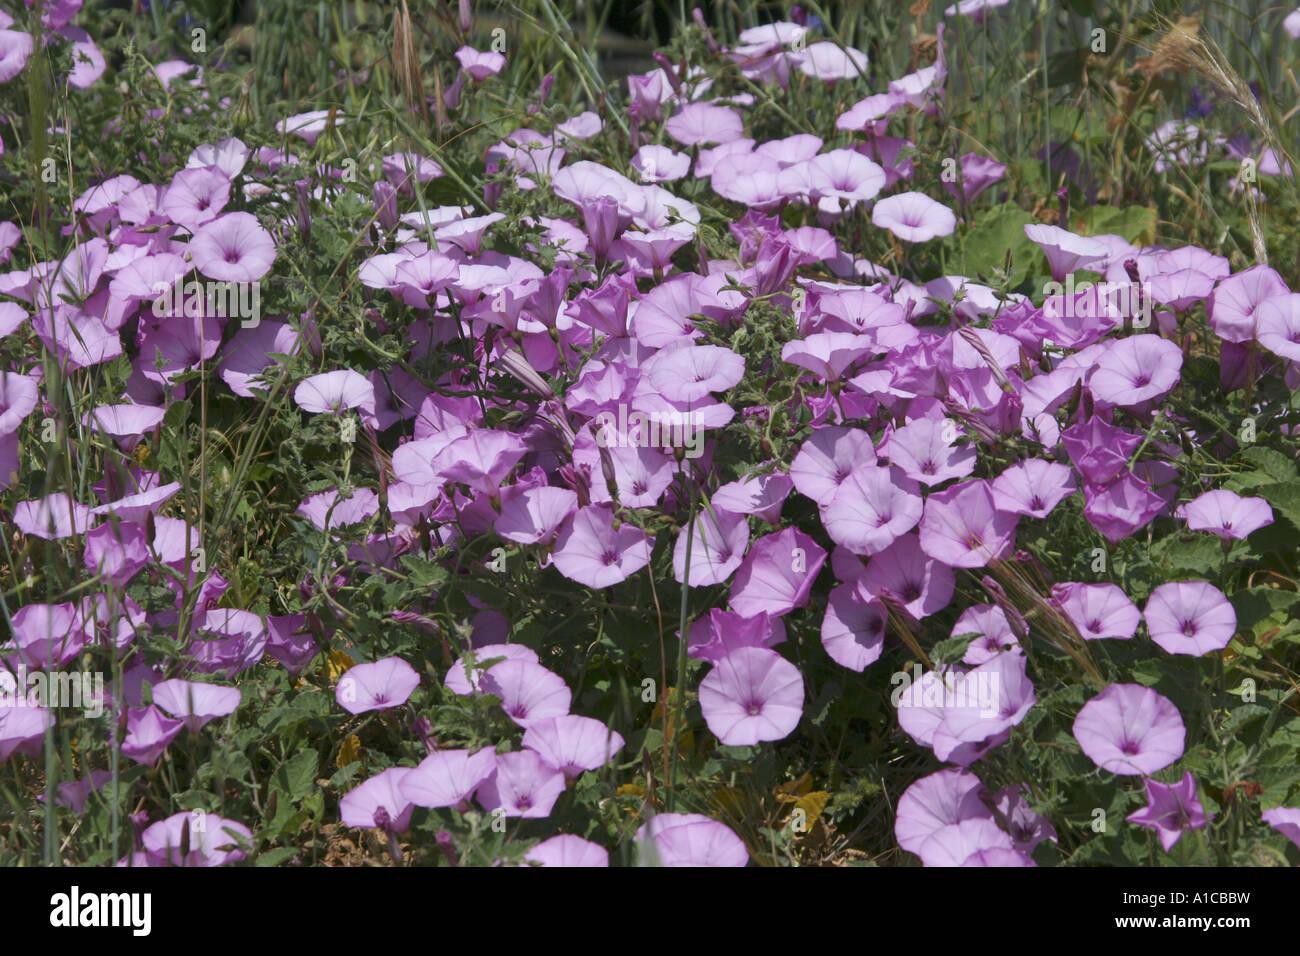 Mallow leaved bindweed, Mallow-leaved bindweed (Convolvulus althaeoides), blooming plants, Spain, Canary Islands, Tenerife Stock Photo